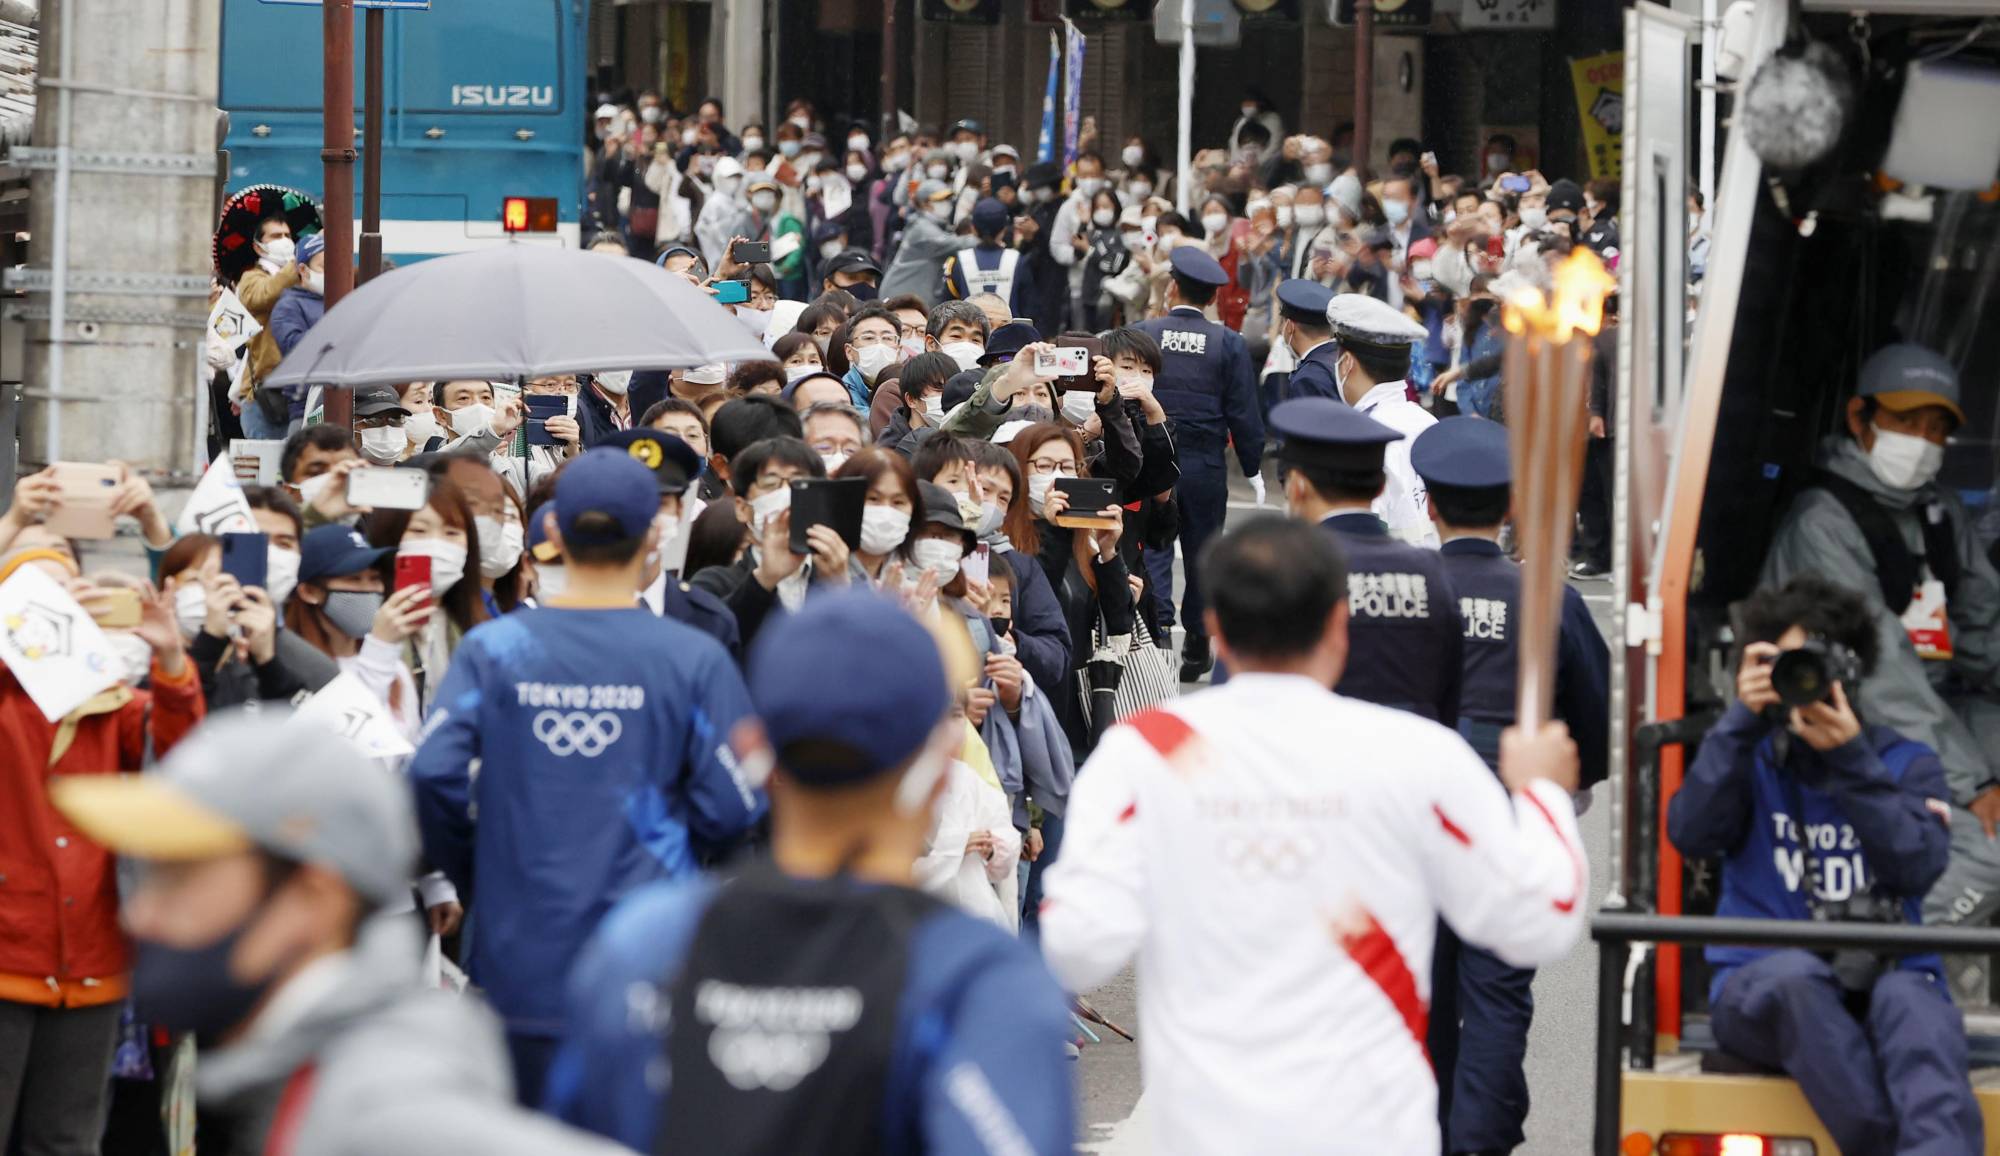 Crowds gather to watch a Tokyo Olympic torchbearer run through the city of Tochigi on Sunday. | KYODO